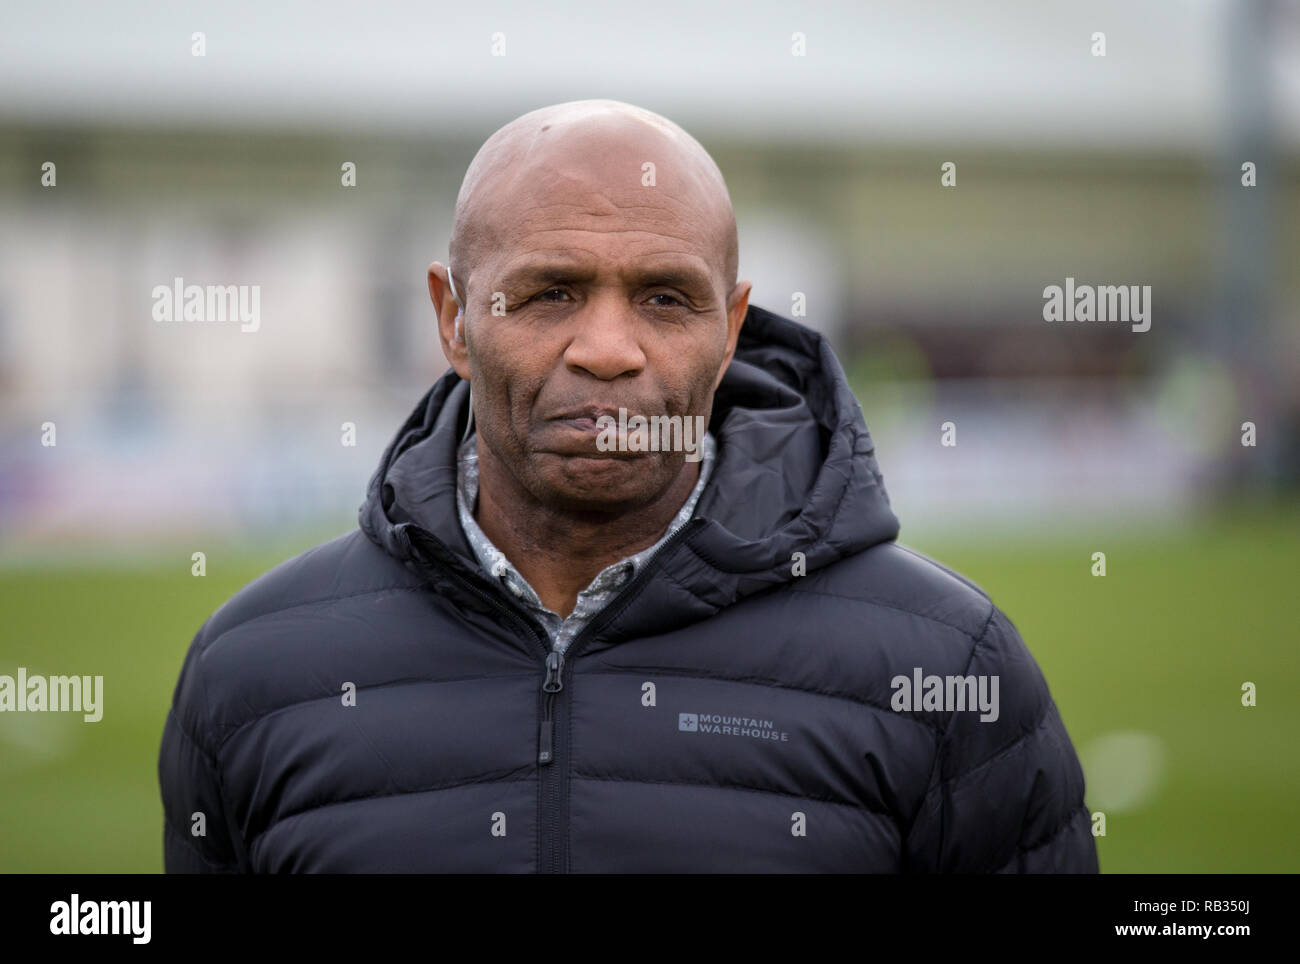 Woking, UK. 06th Jan, 2019. Former Watford FC player Luther Blissett ahead of the FA Cup 3rd round match between Woking and Watford at the Kingfield Stadium, Woking, England on 6 January 2019. Photo by Andy Rowland. . (Photograph May Only Be Used For Newspaper And/Or Magazine Editorial Purposes. www.football-dataco.com) Credit: Andrew Rowland/Alamy Live News Stock Photo